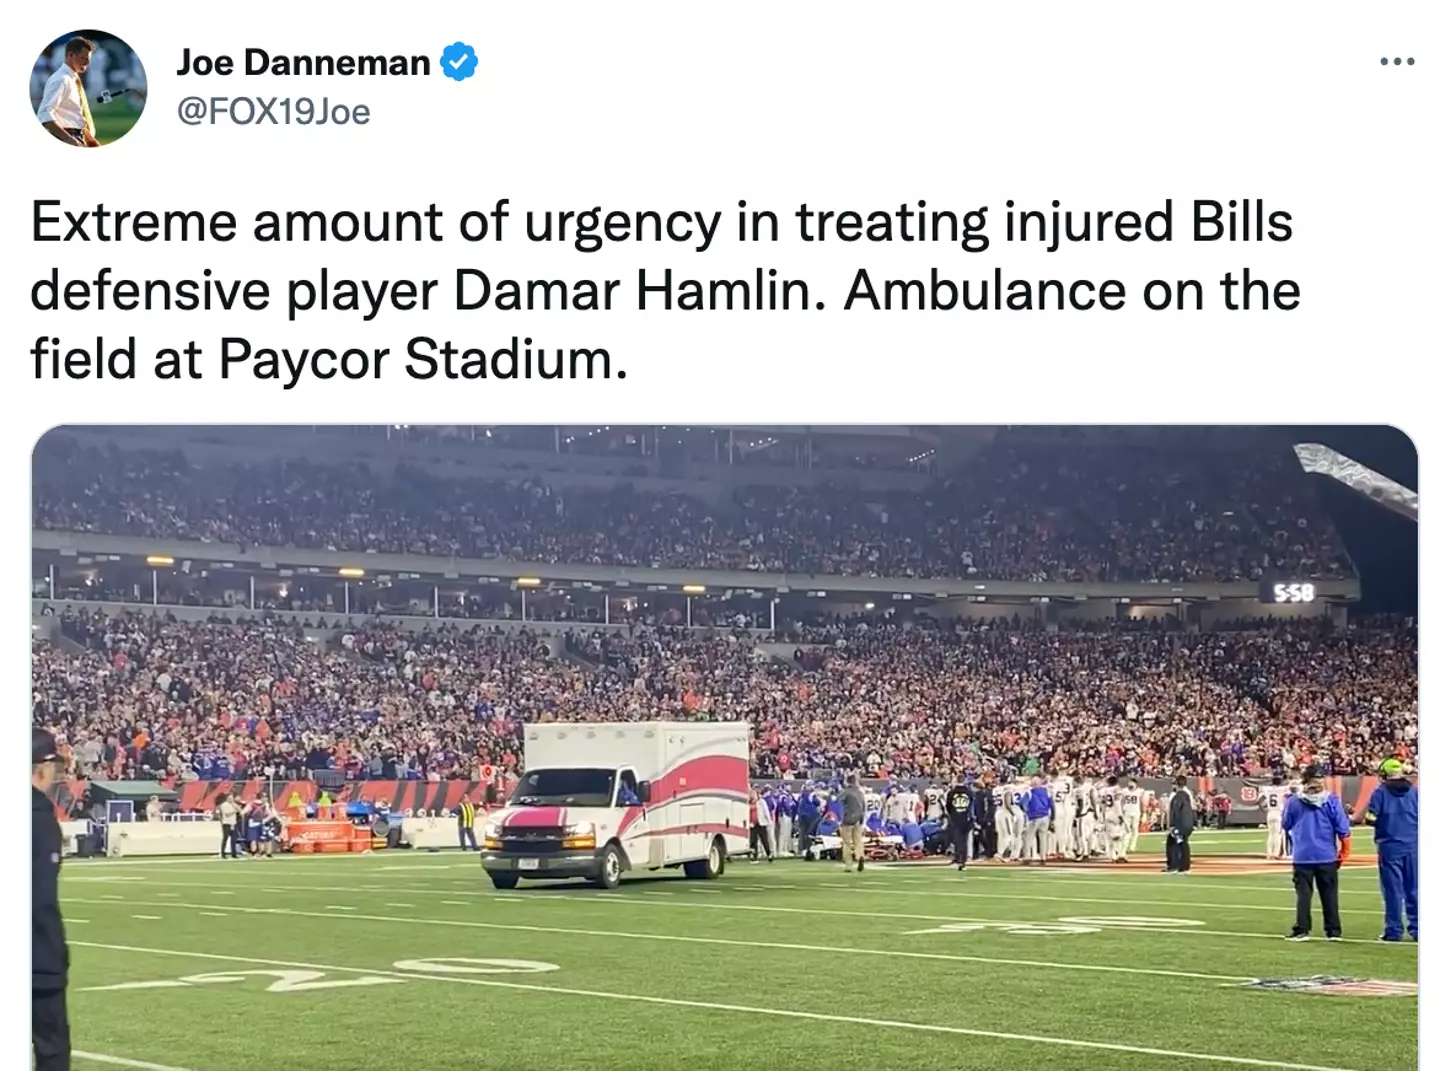 An ambulance was brought on to the field after Hamlin collapsed.